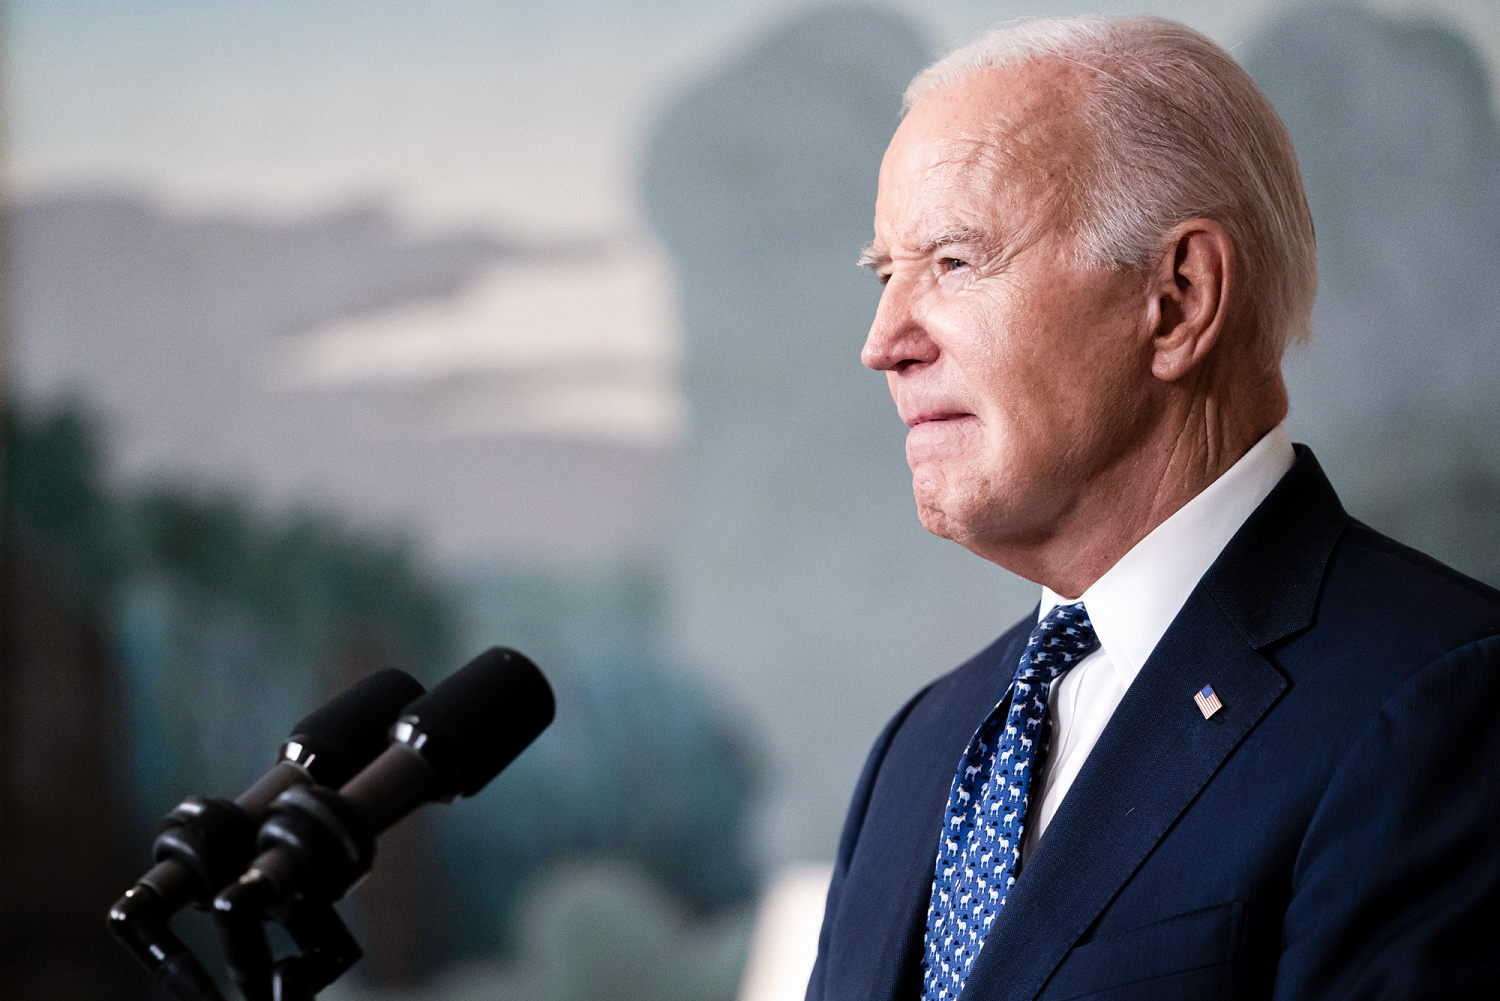 Business groups hit back at Biden administration's effort to cap credit card late fees